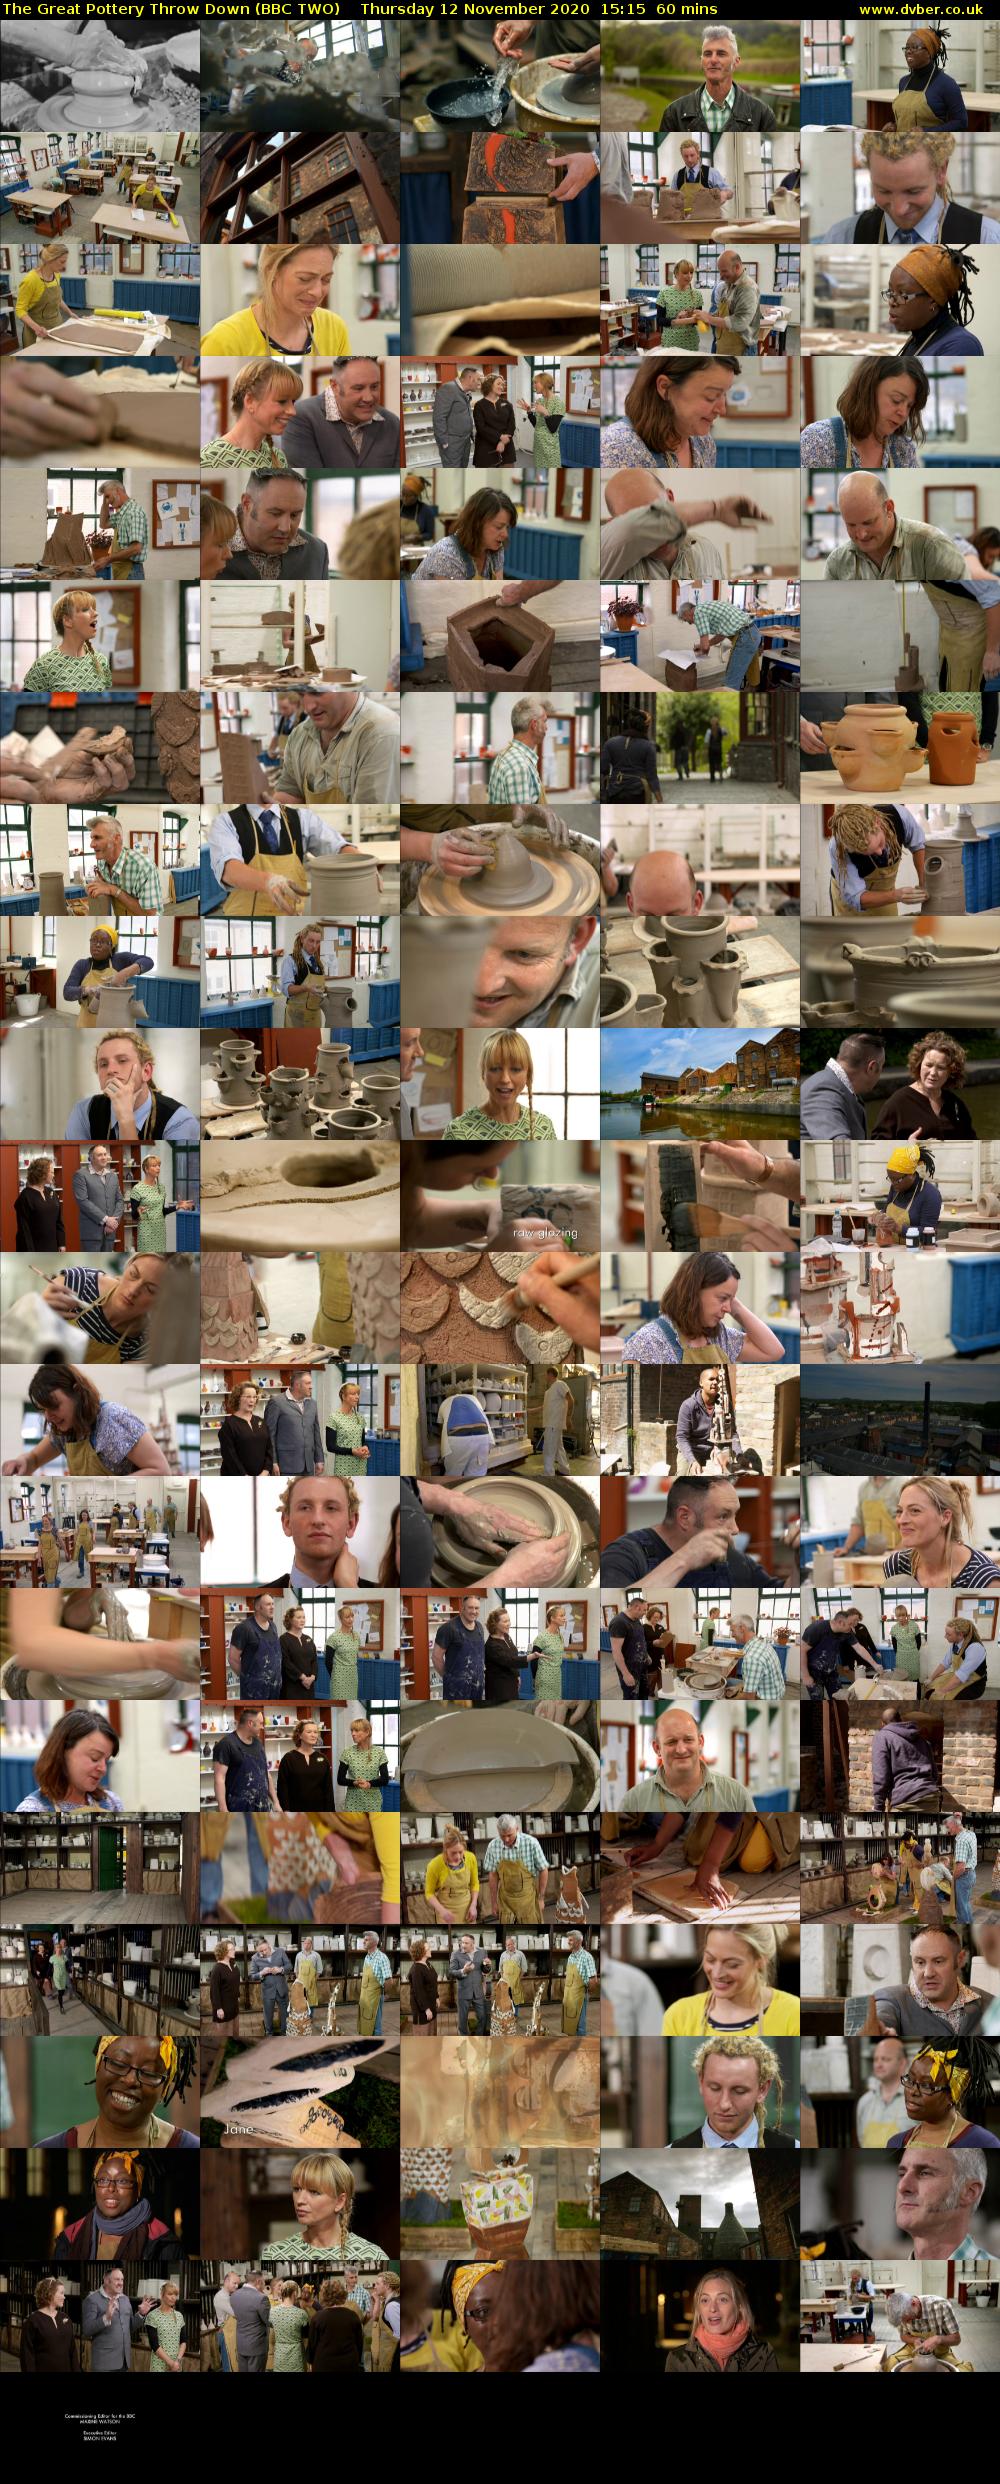 The Great Pottery Throw Down (BBC TWO) Thursday 12 November 2020 15:15 - 16:15